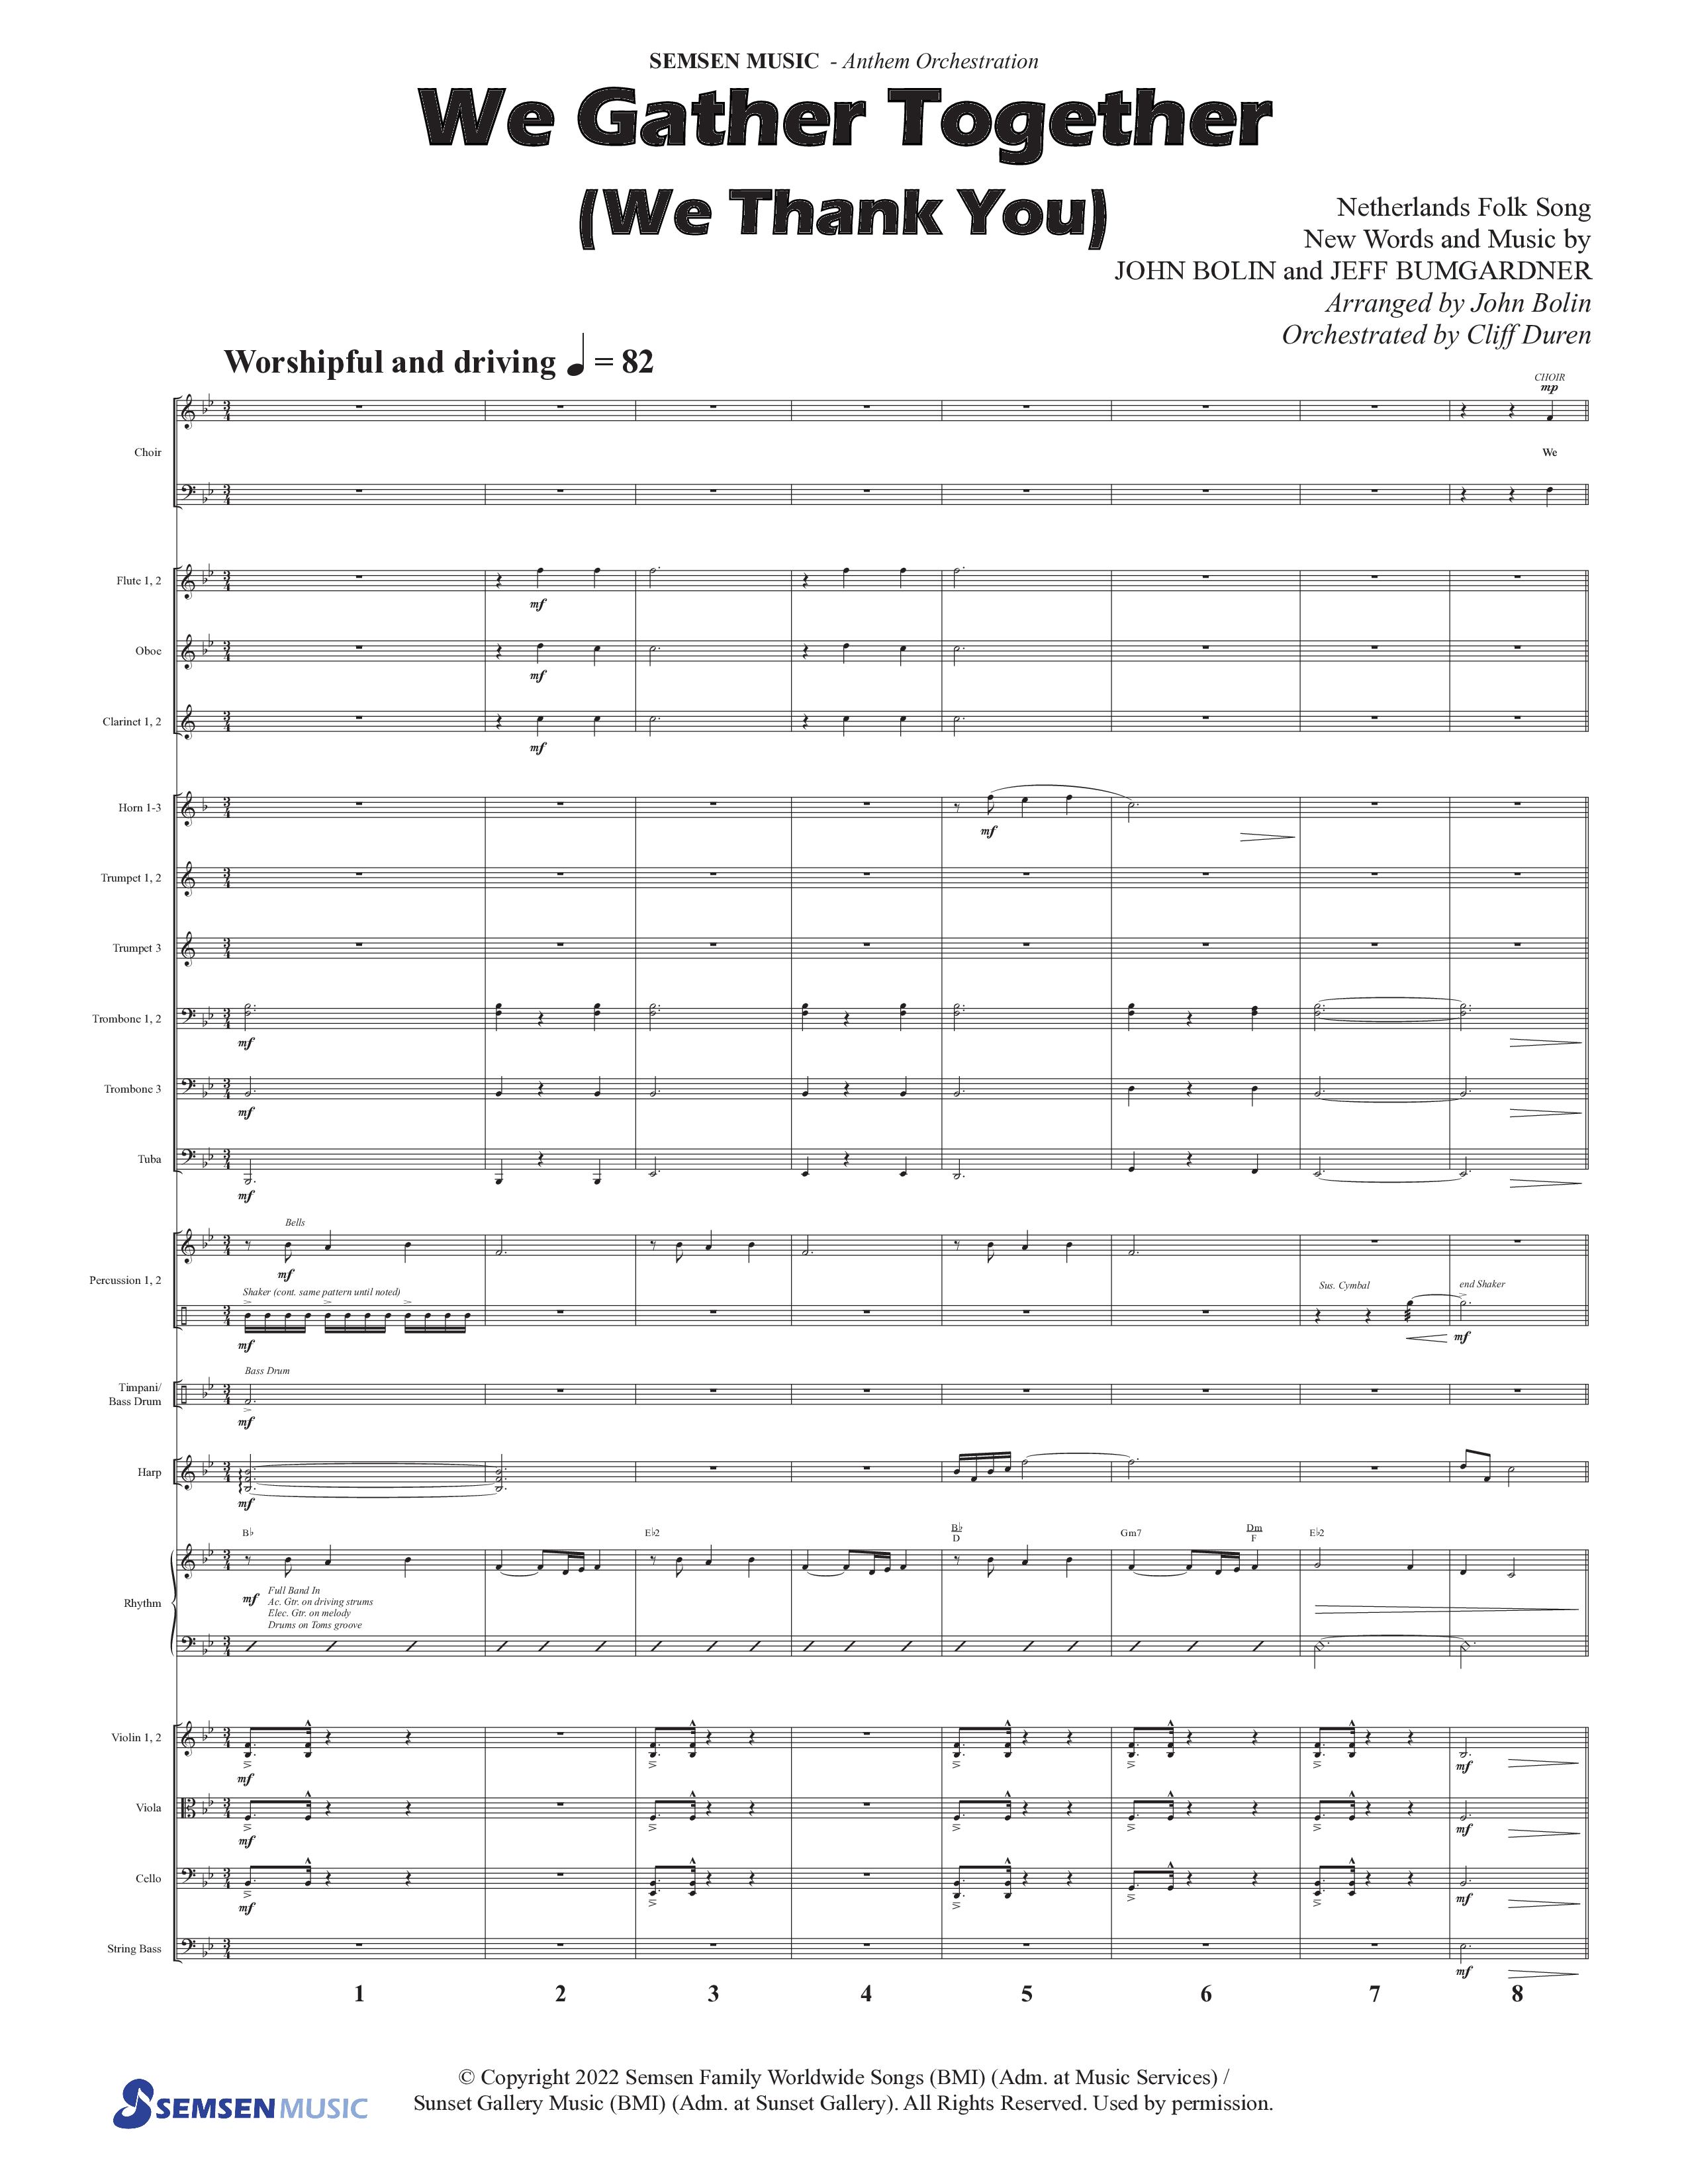 We Gather Together (We Thank You) (Choral Anthem SATB) Orchestration (Semsen Music / Arr. John Bolin / Orch. Cliff Duren)